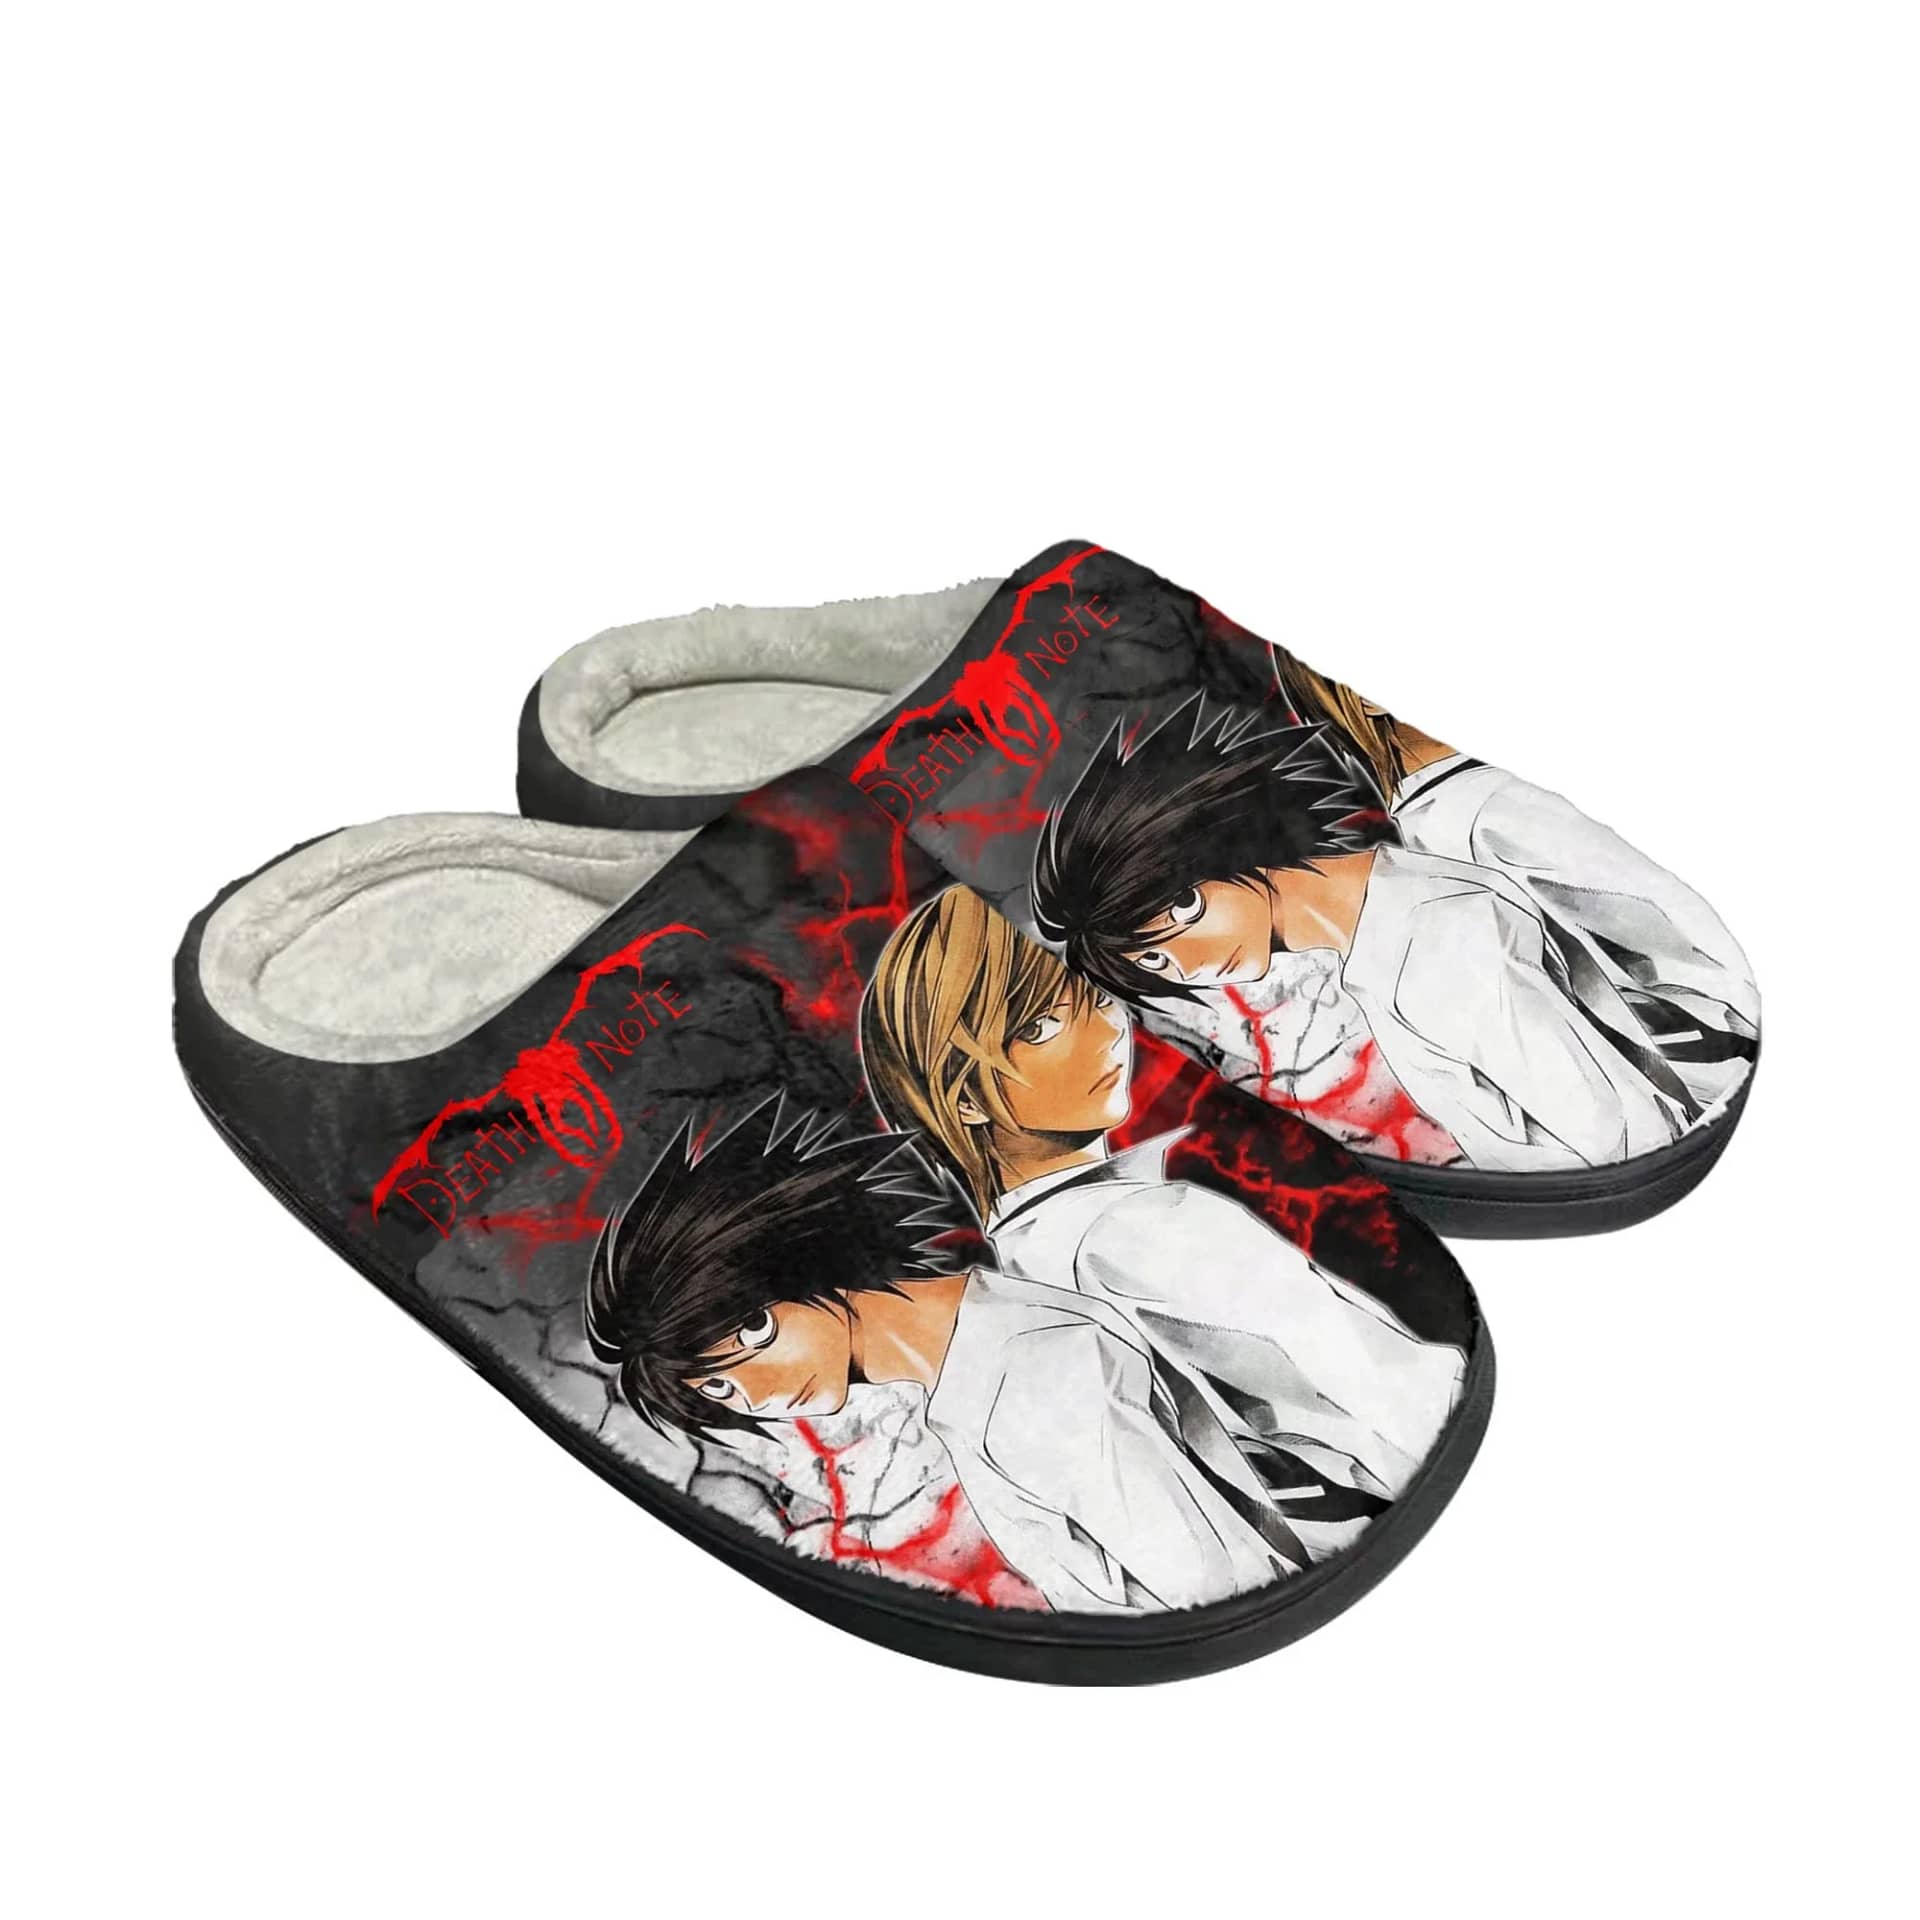 Yagami Lawliet L Custom Anime Death Note Shoes Slippers